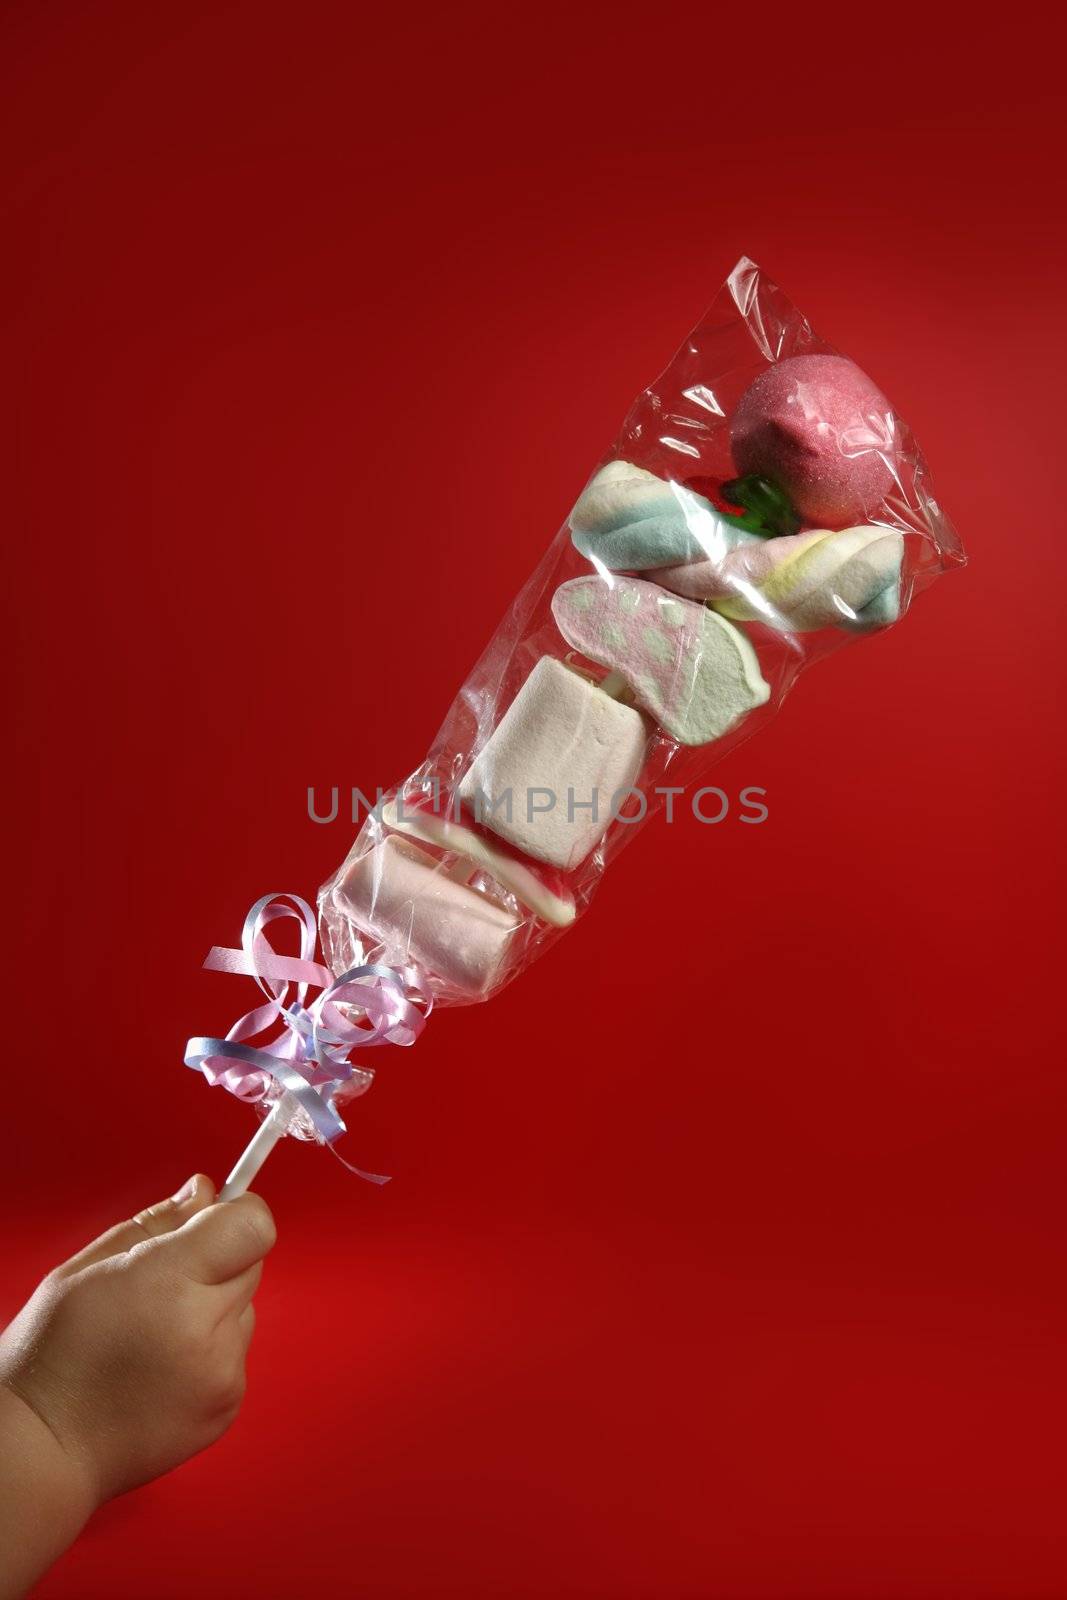 Candy colorful lolipop on child hand over red background